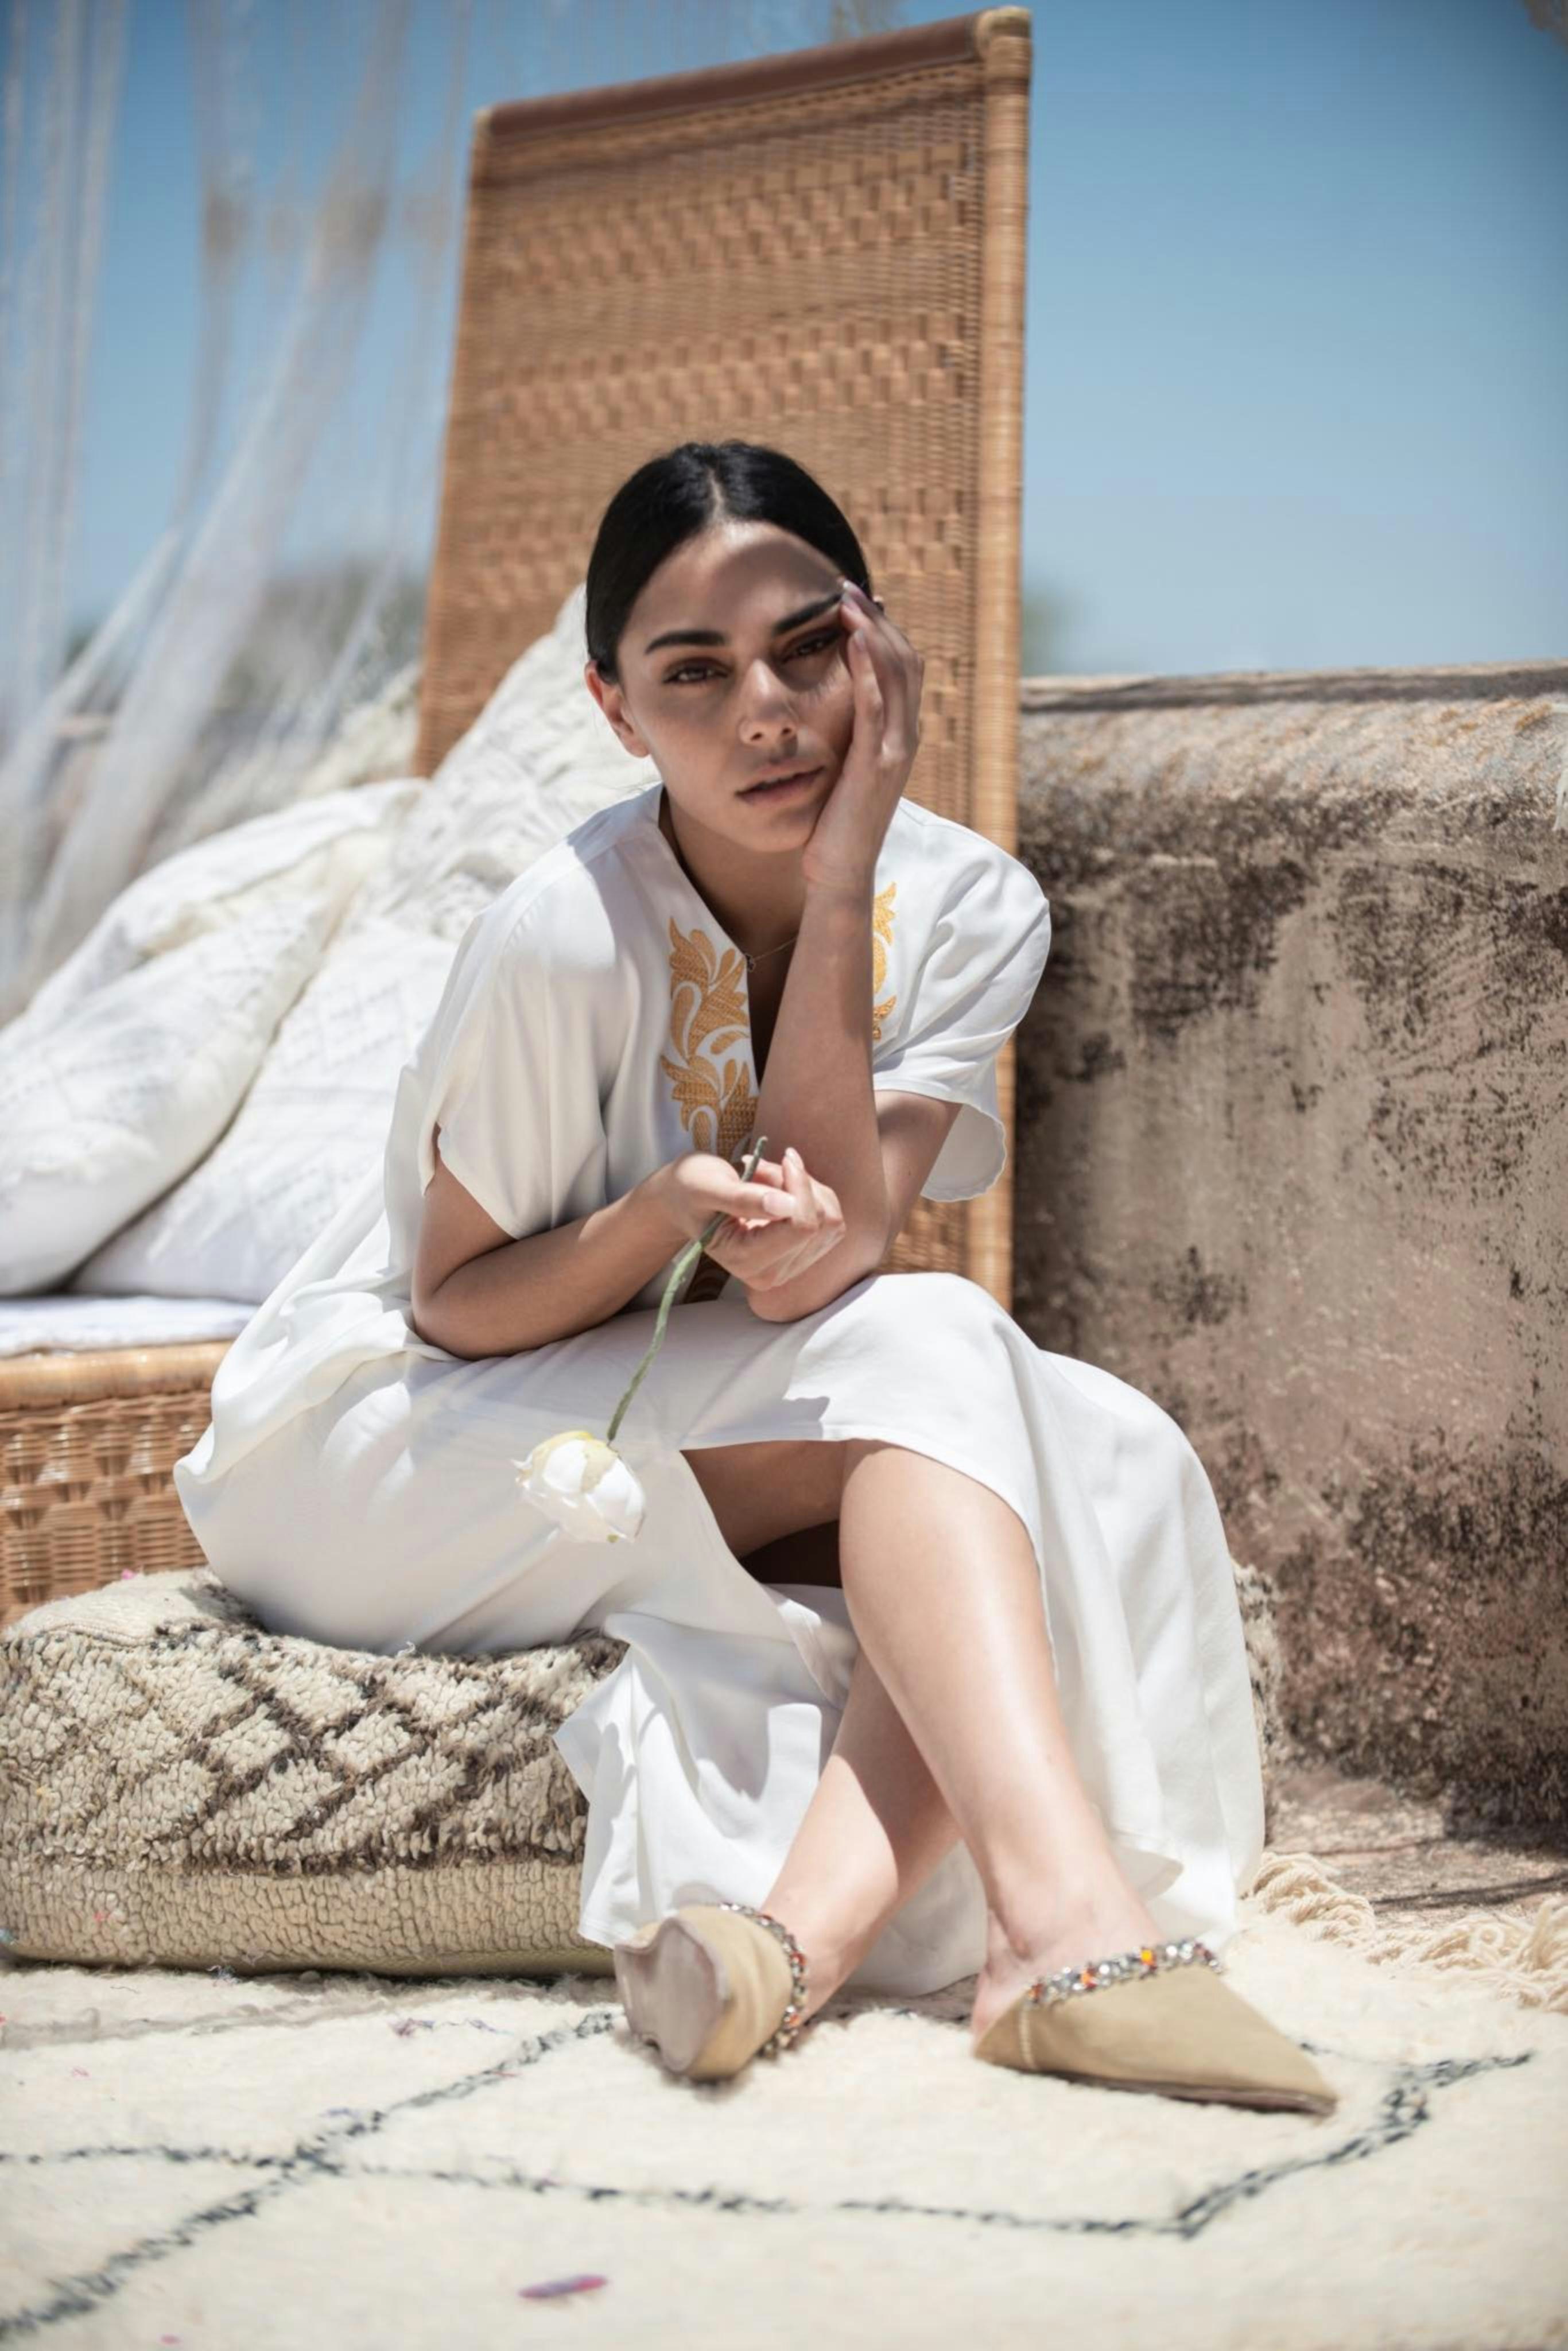 A model sits on a cushion on a rooftop wearing flowing, white-and-gold fabrics